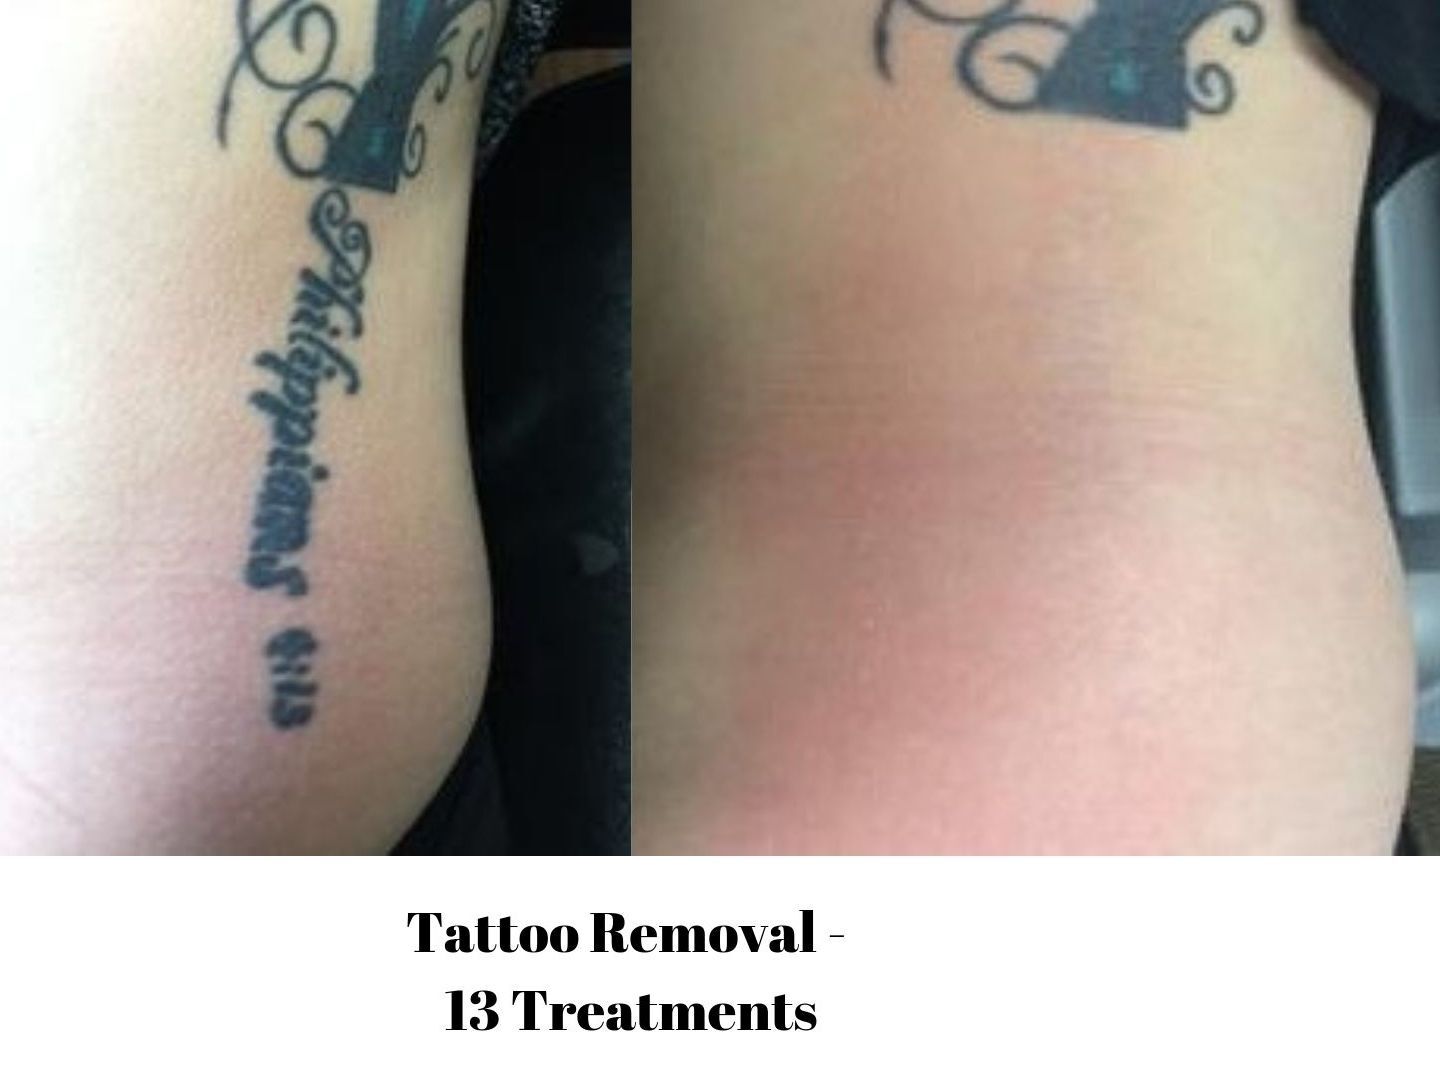 Tattoo Removal Before and After  Tattoo removal Tattoo removal results  Full tattoo